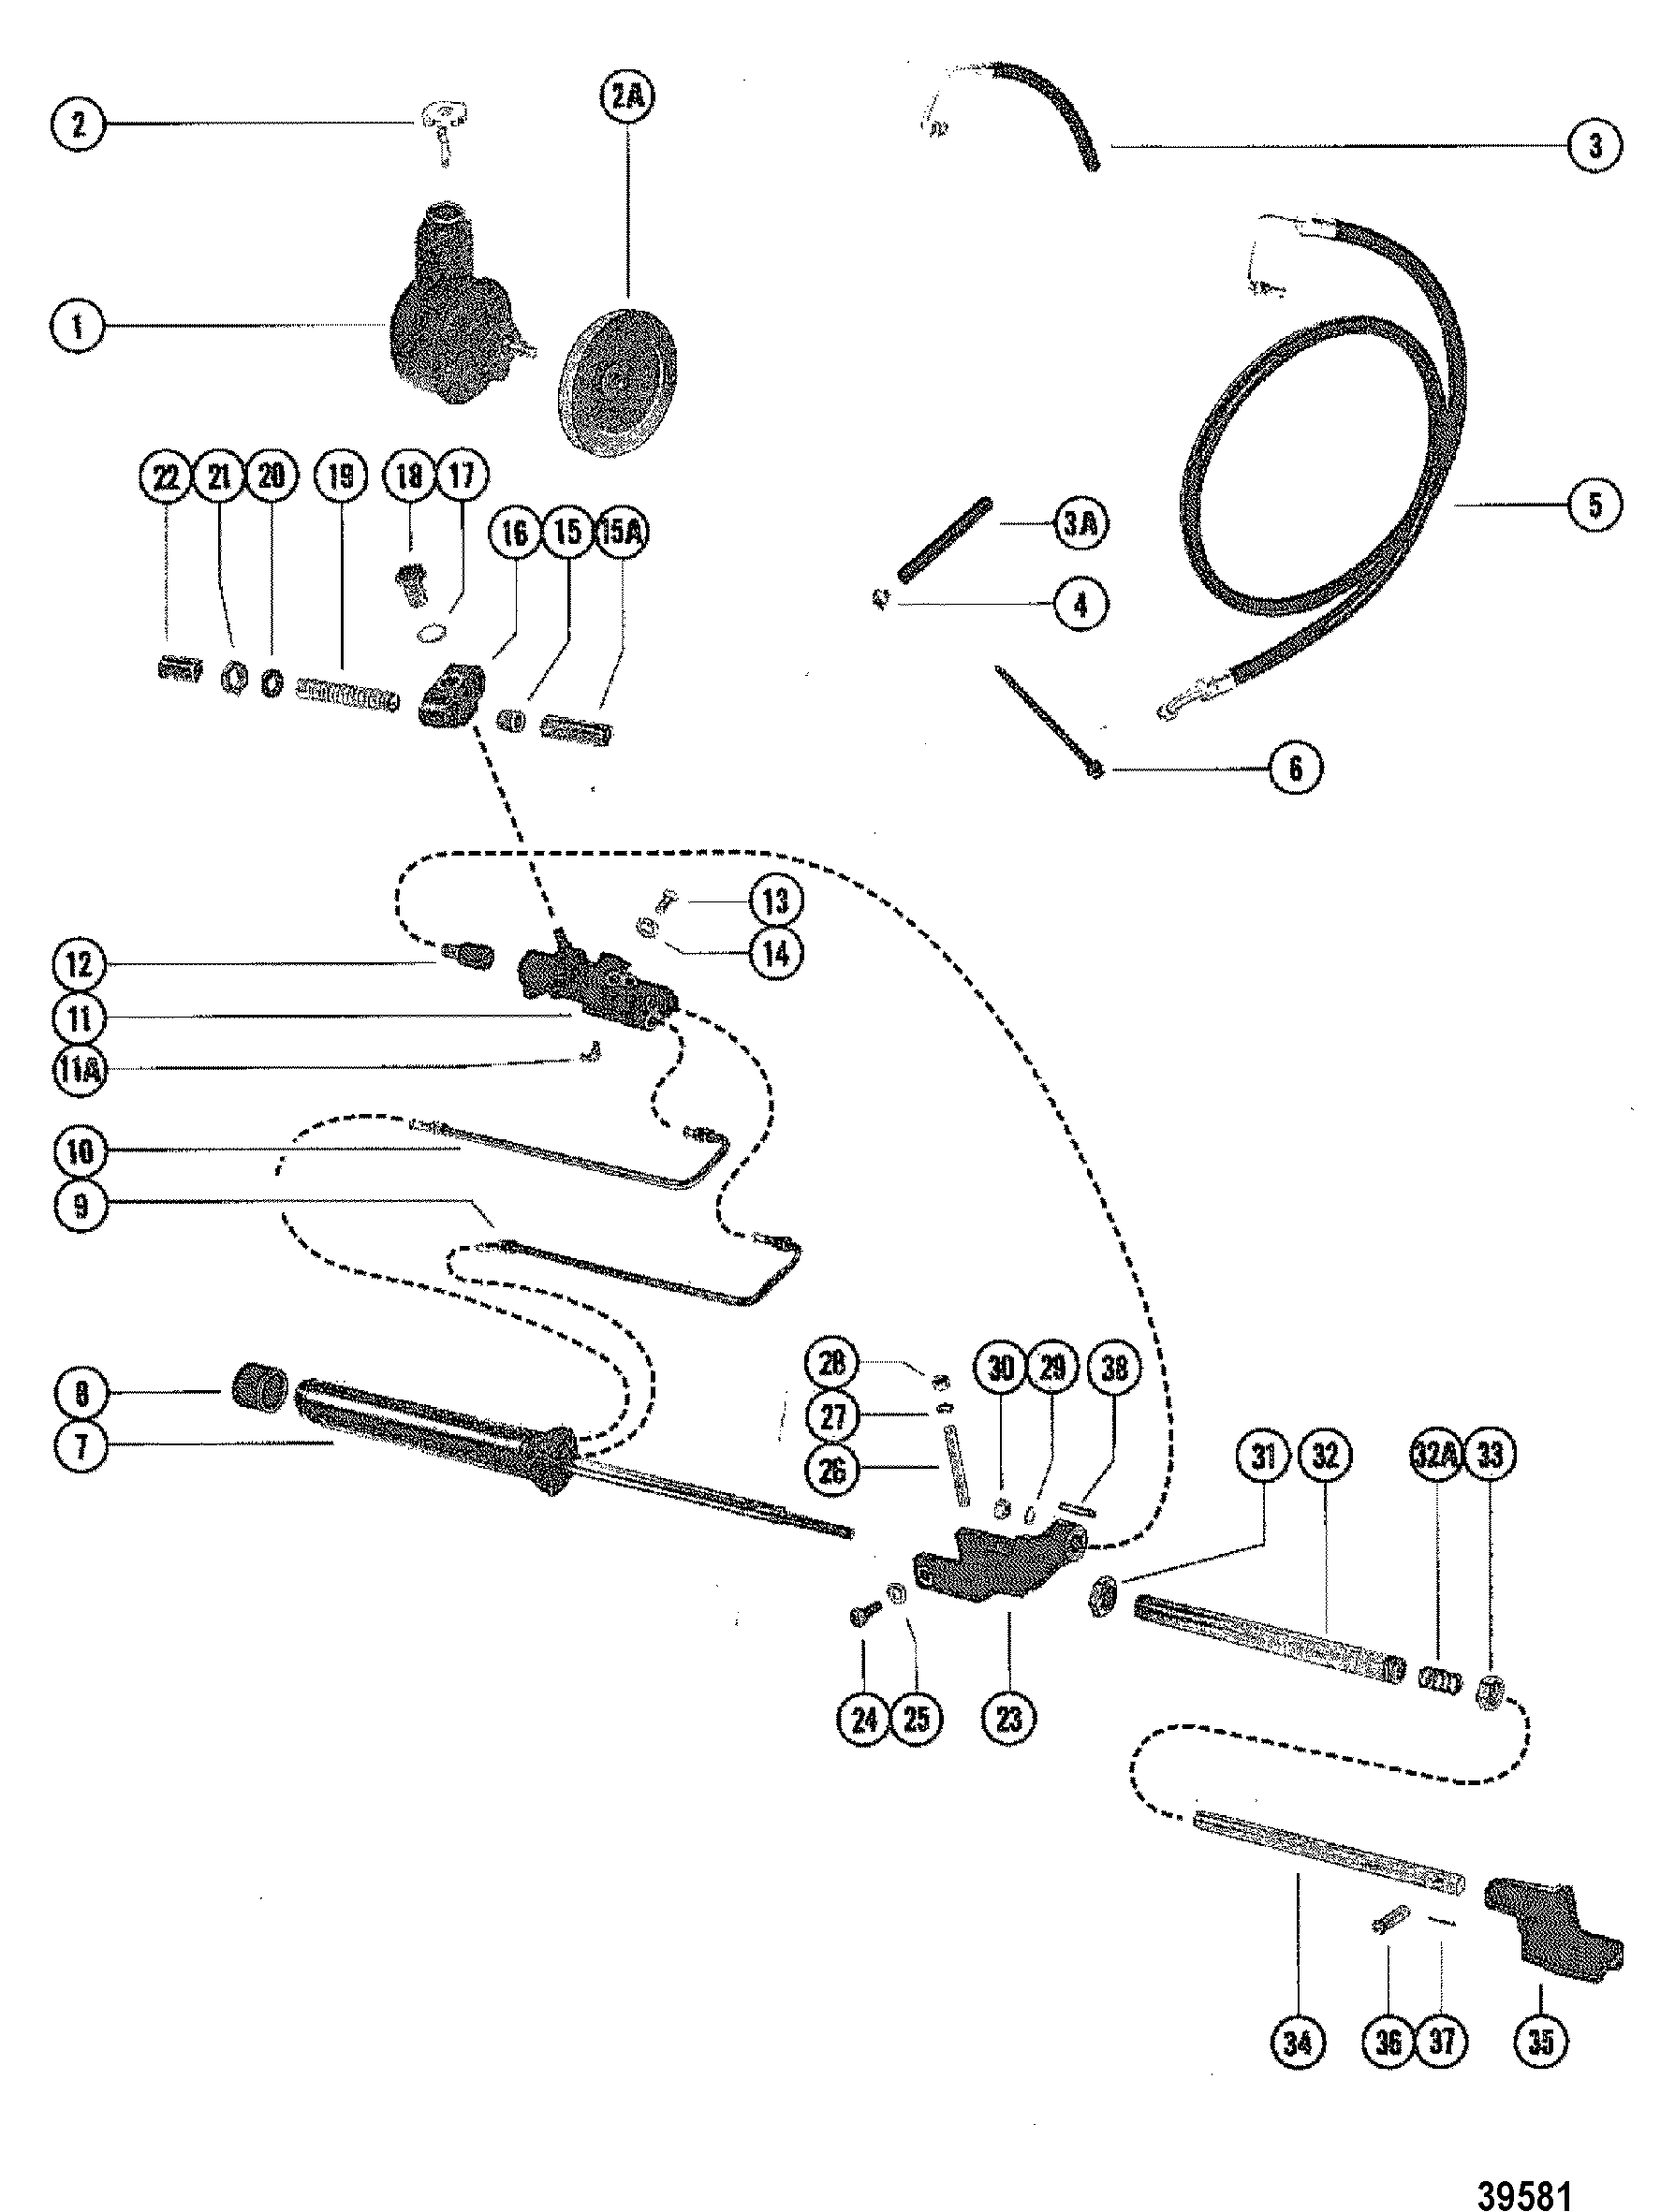 POWER STEERING COMPONENTS(V-ENGINES)